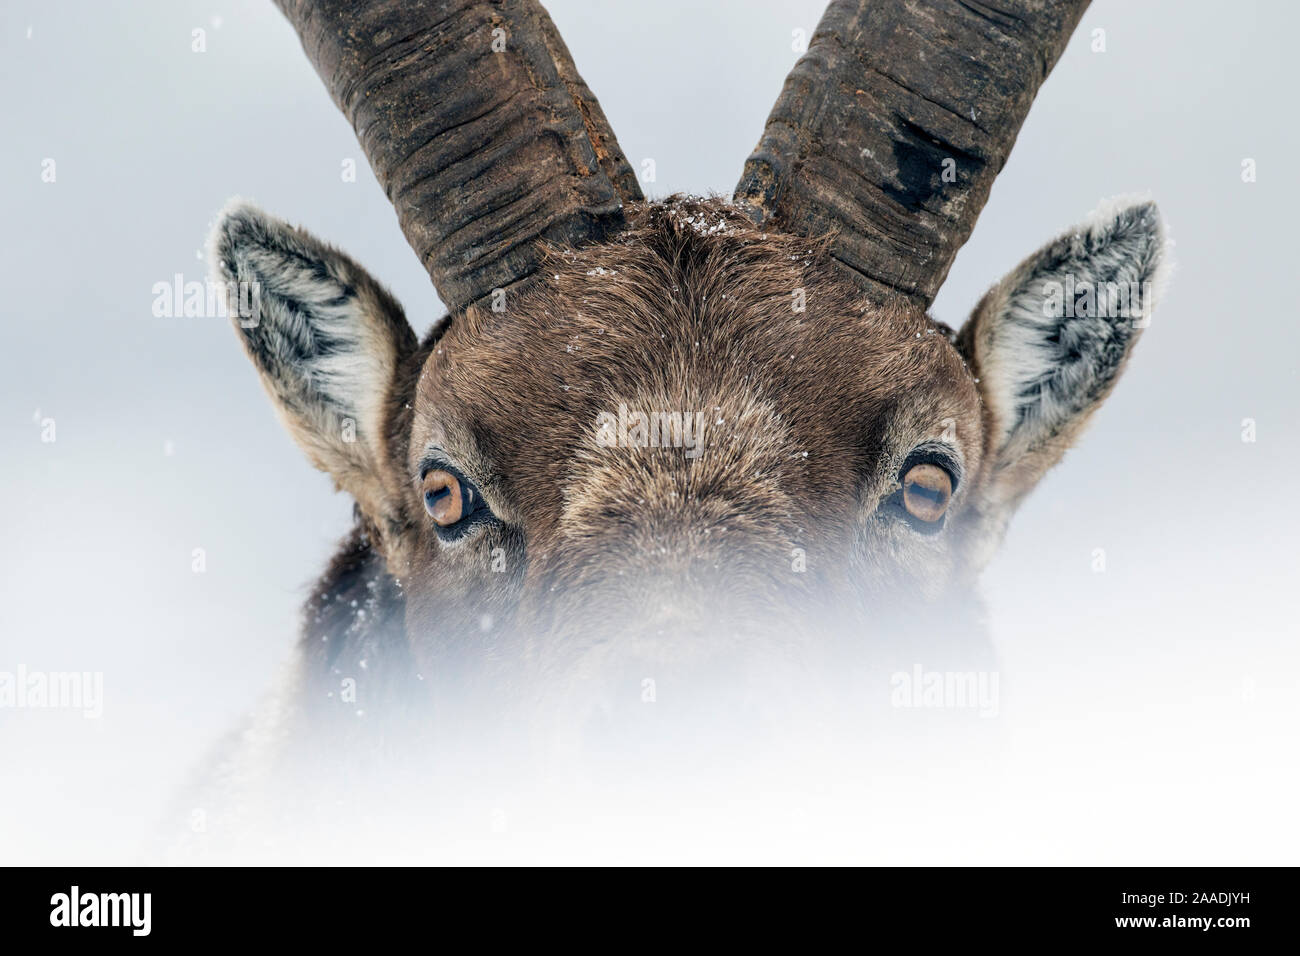 Alpine ibex (Capra ibex) close-up portrait. Gran Paradiso National Park, the Alps, Italy. January.  Highly commended in the Portfolio category of the Terre Sauvage Nature Images Awards 2017. Stock Photo